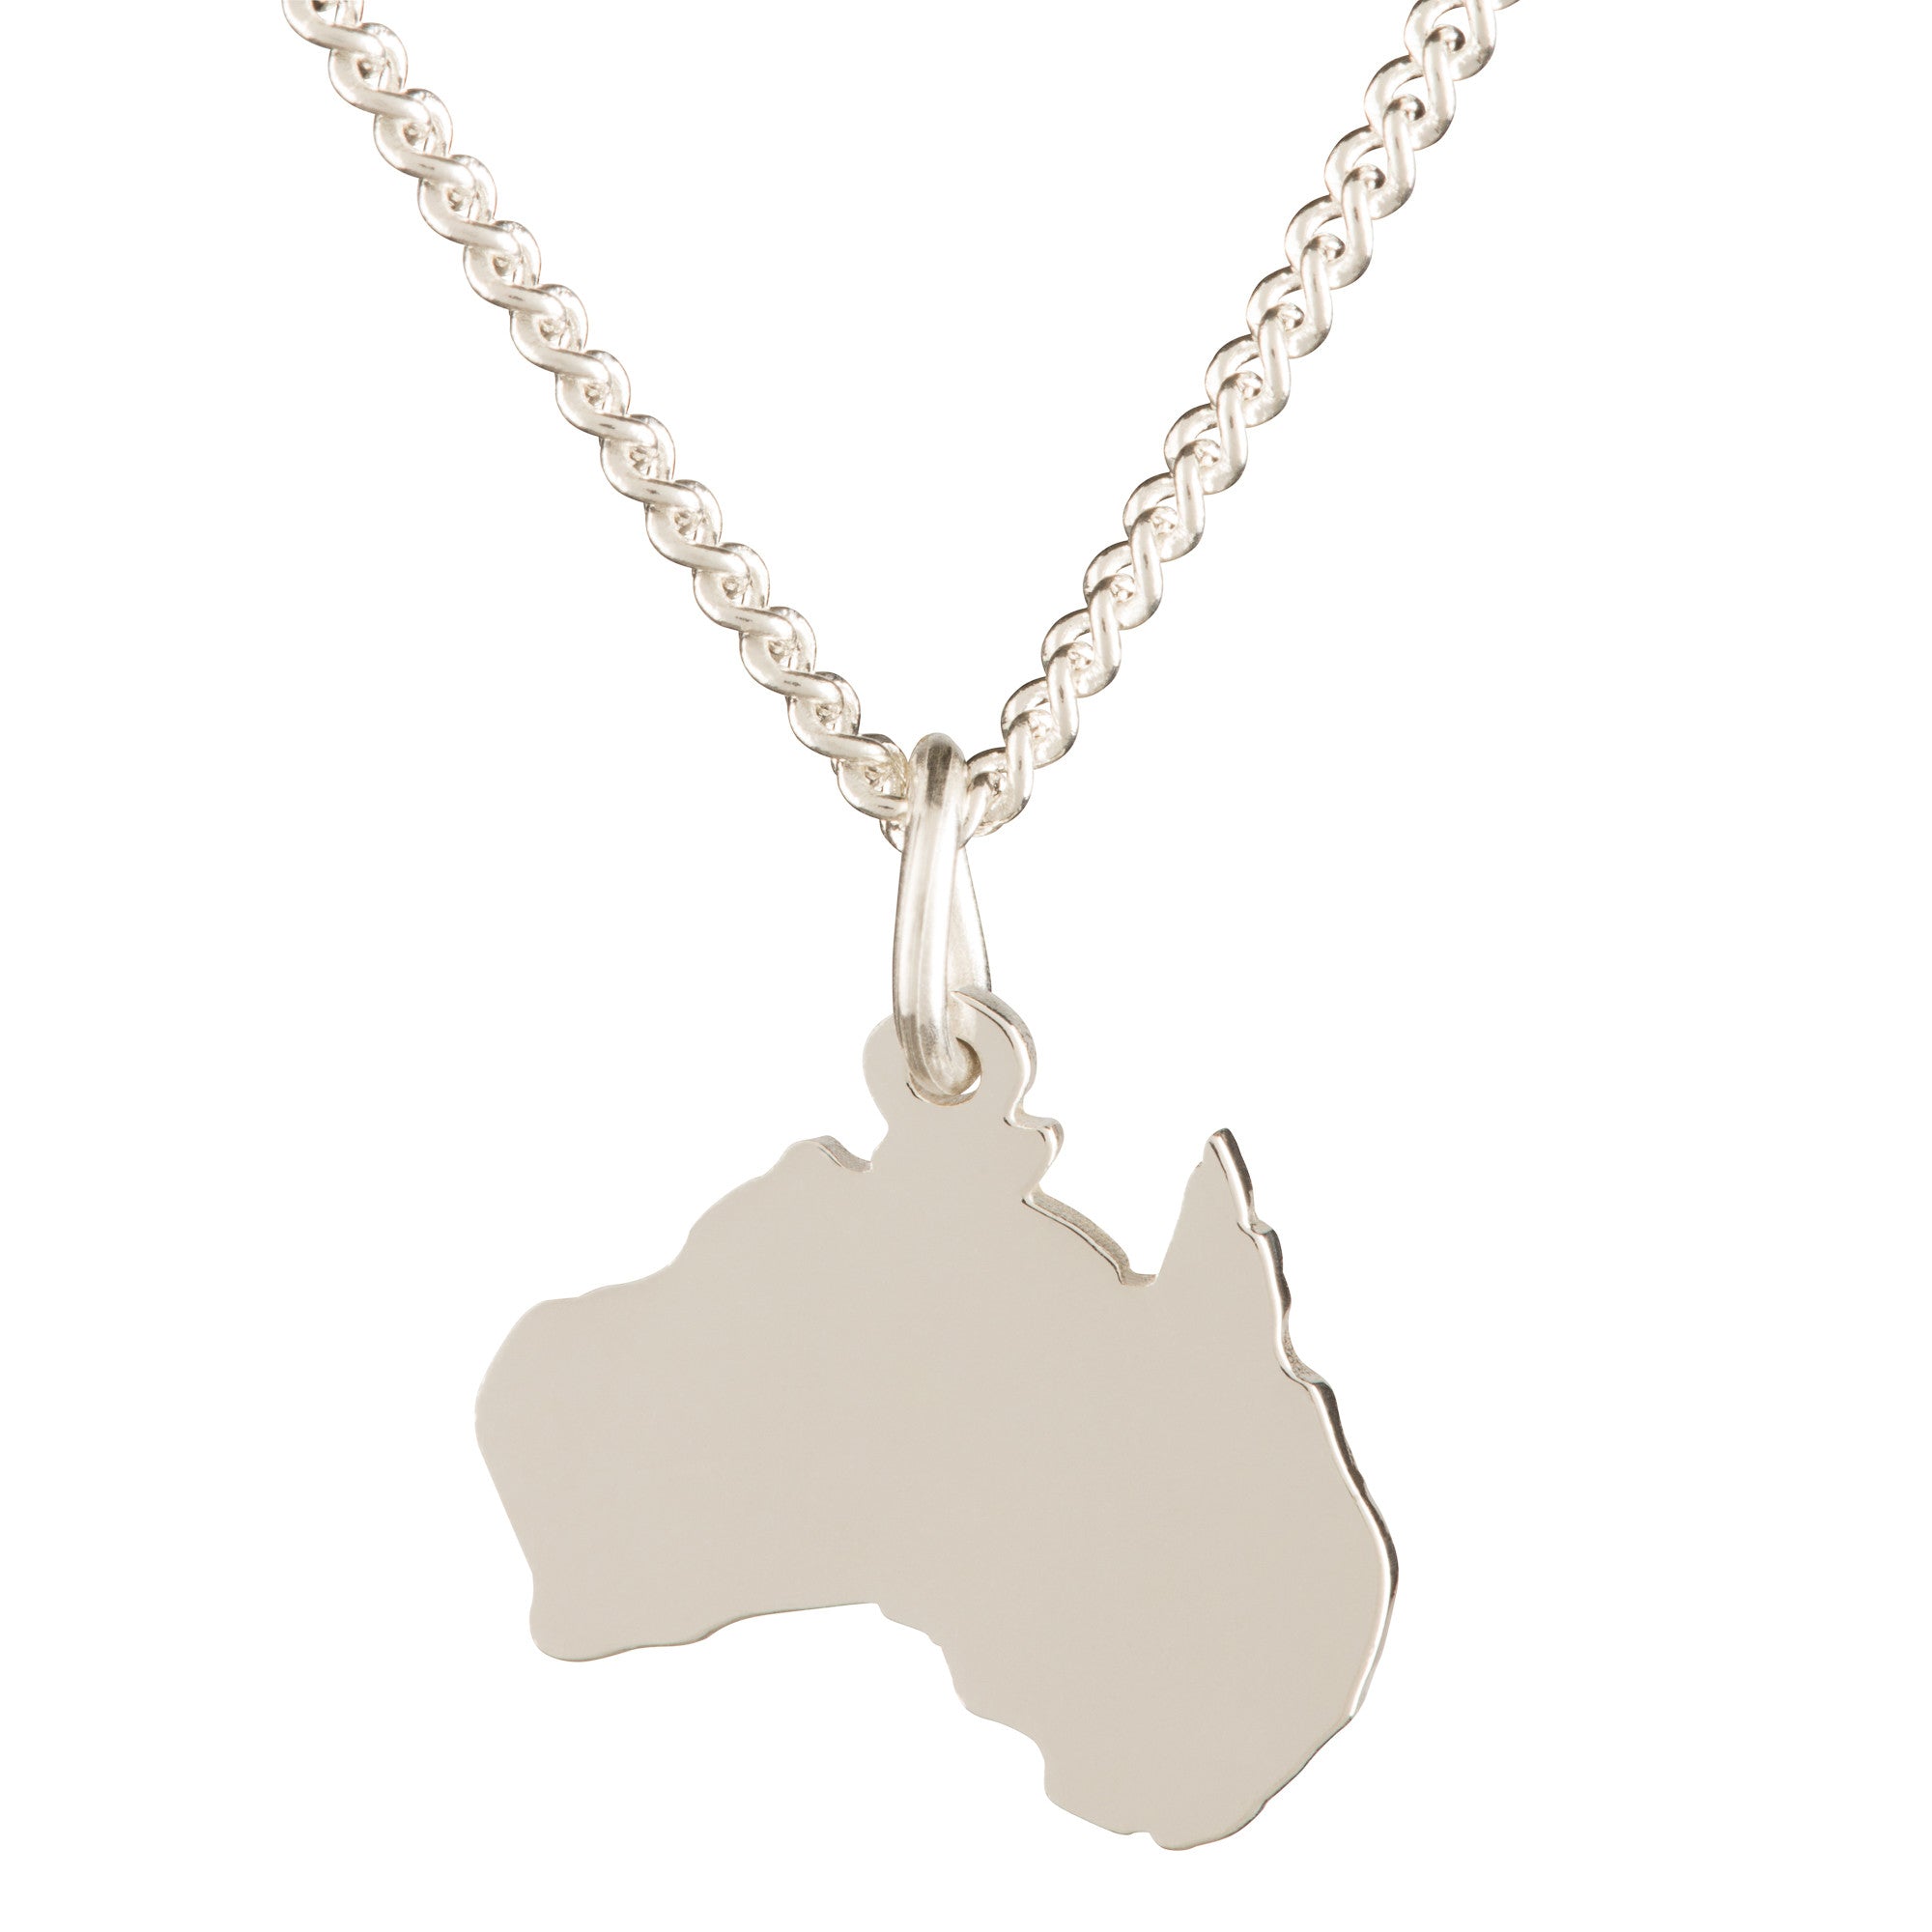 By.Ortiz-Australia-necklace-18k-Gold-Plated